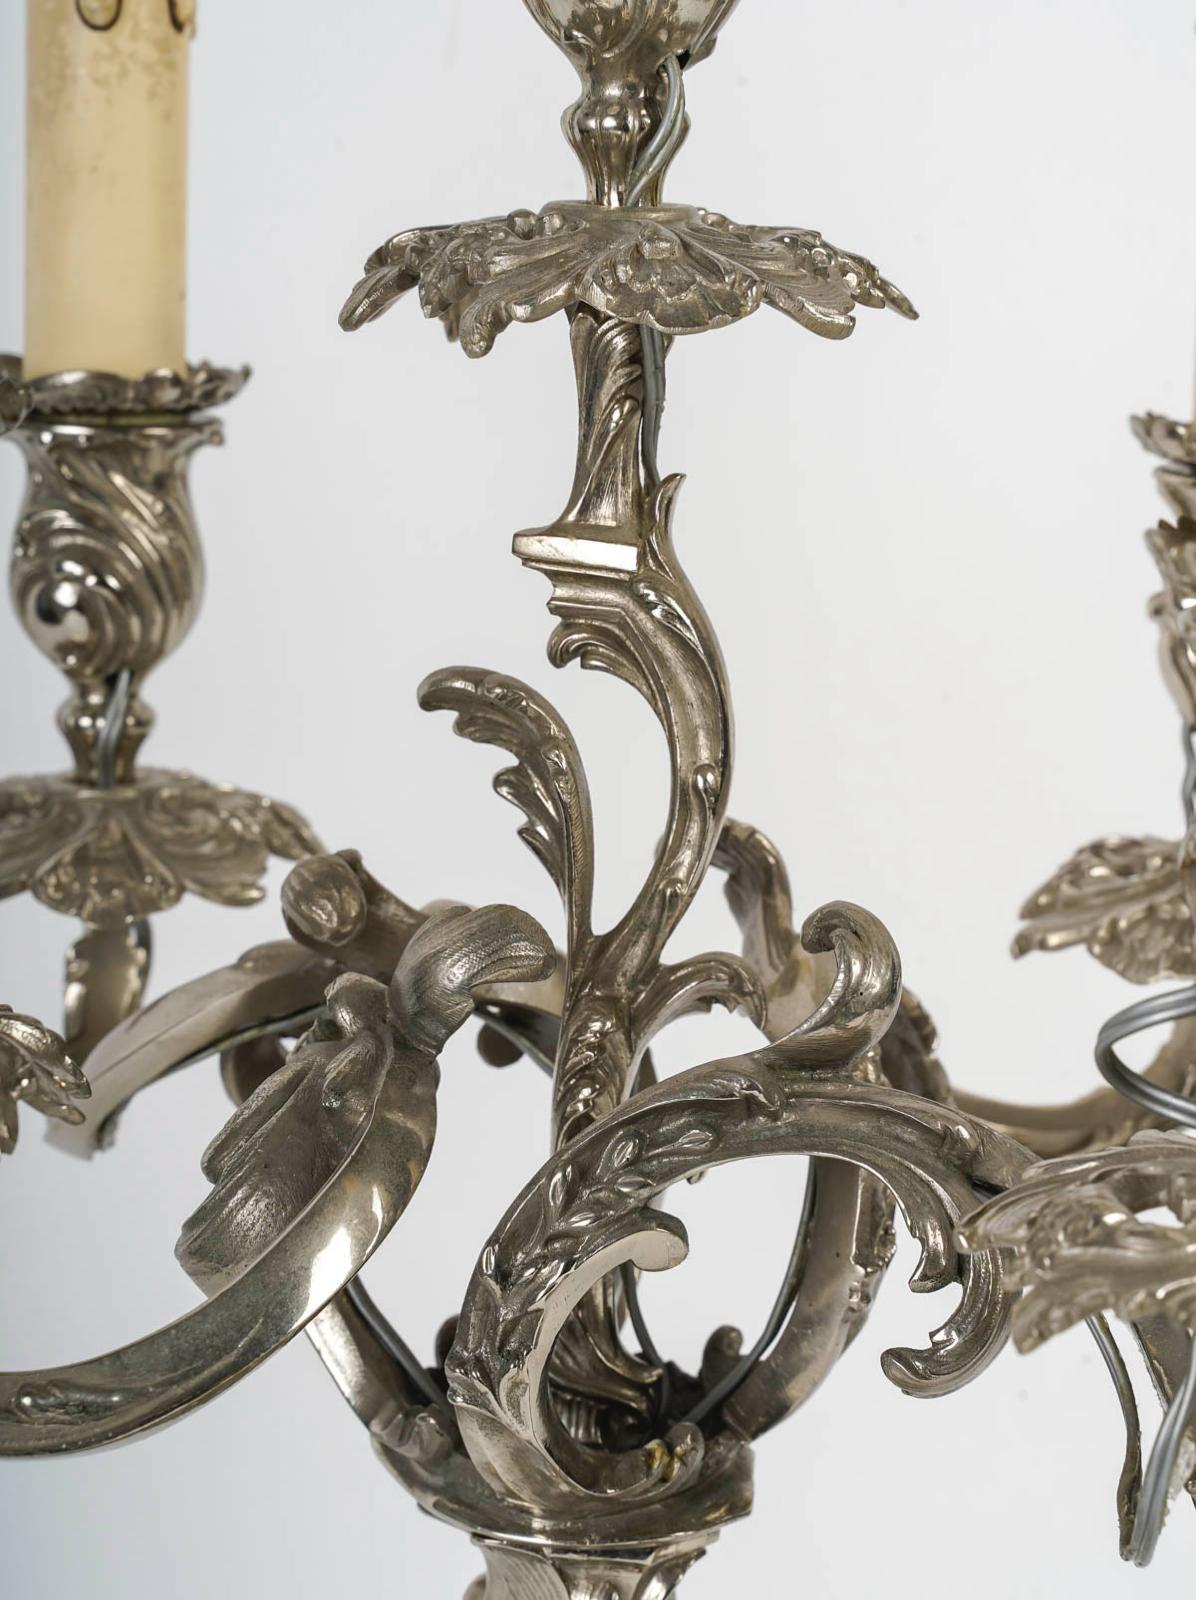 Pair of Louis XV style silver plated bronze candelabra, 19th Century.

A pair of Louis XV style silvered bronze candelabras, electrically mounted, each with 5 arms.
h: 50cm, d: 33cm